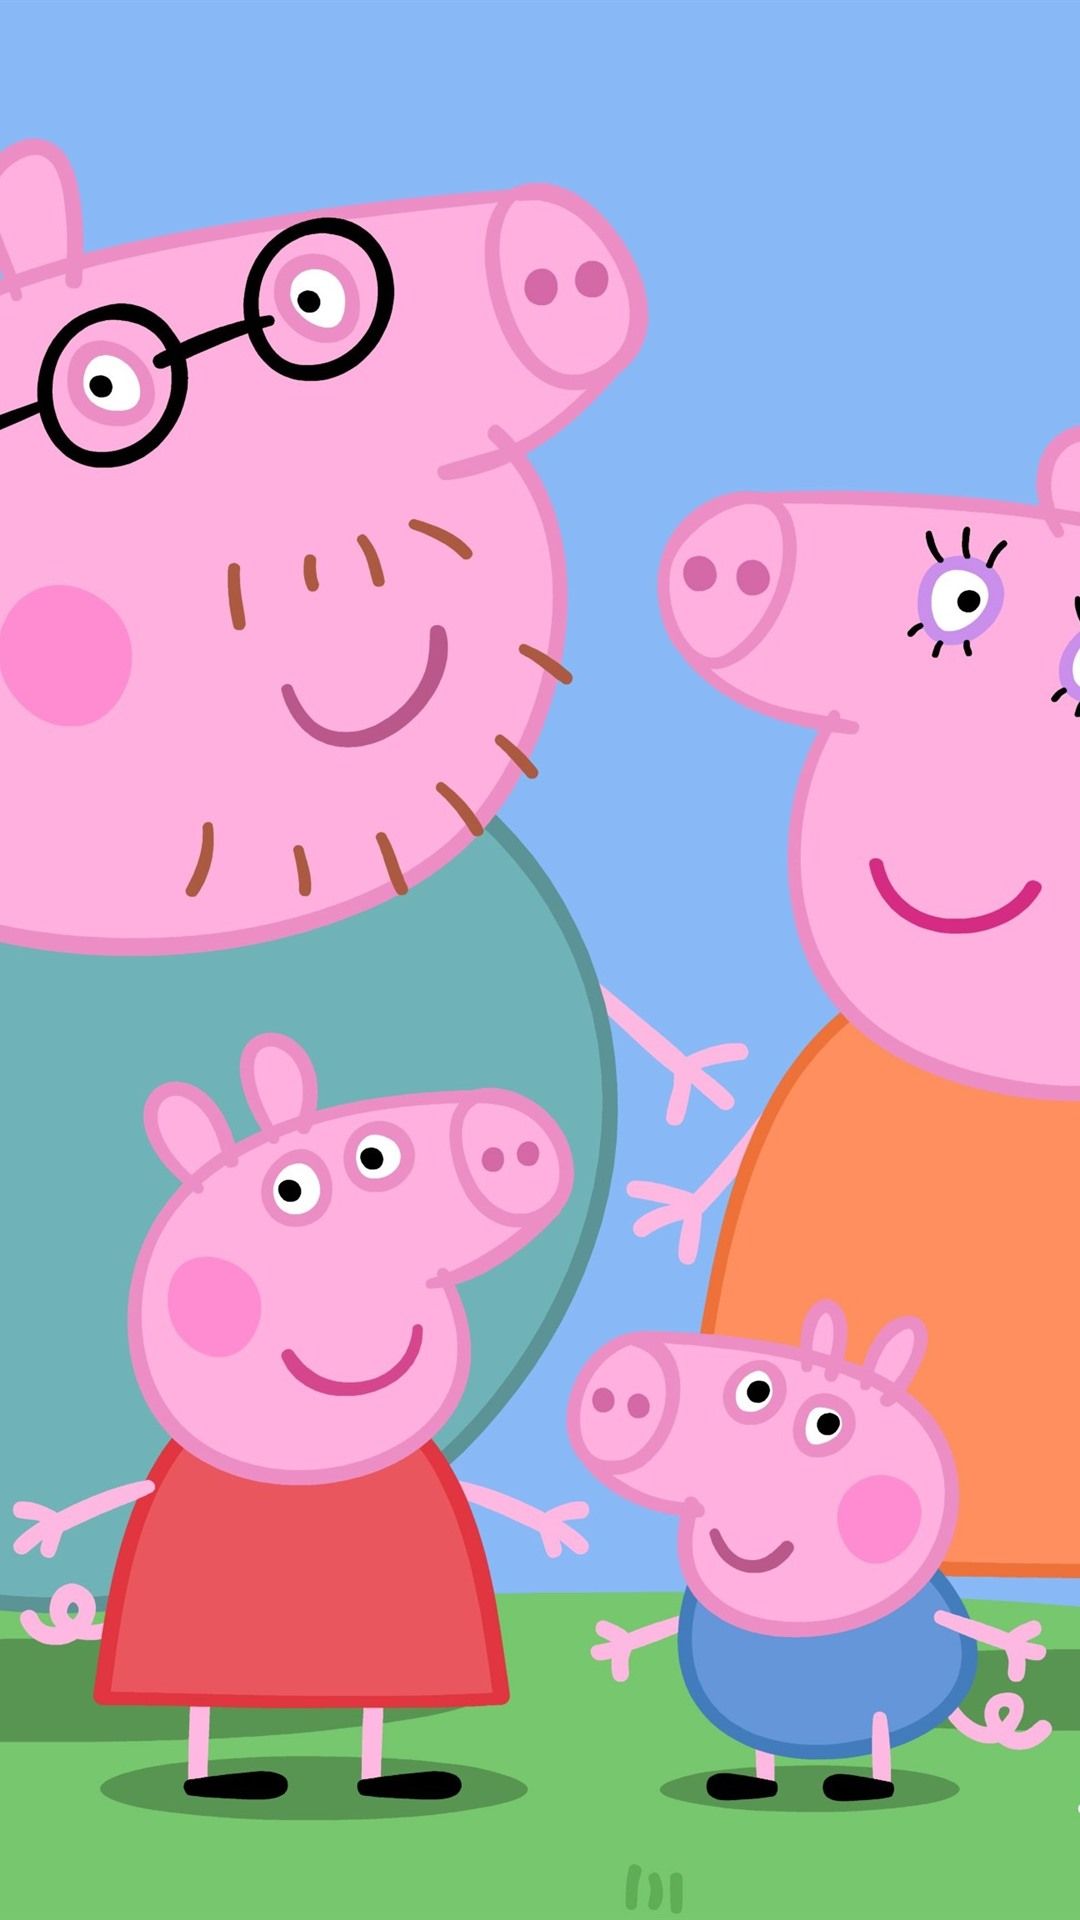 Best Peppa Pig Wallpapers for iPhone, iPad, Android - 2022 Update